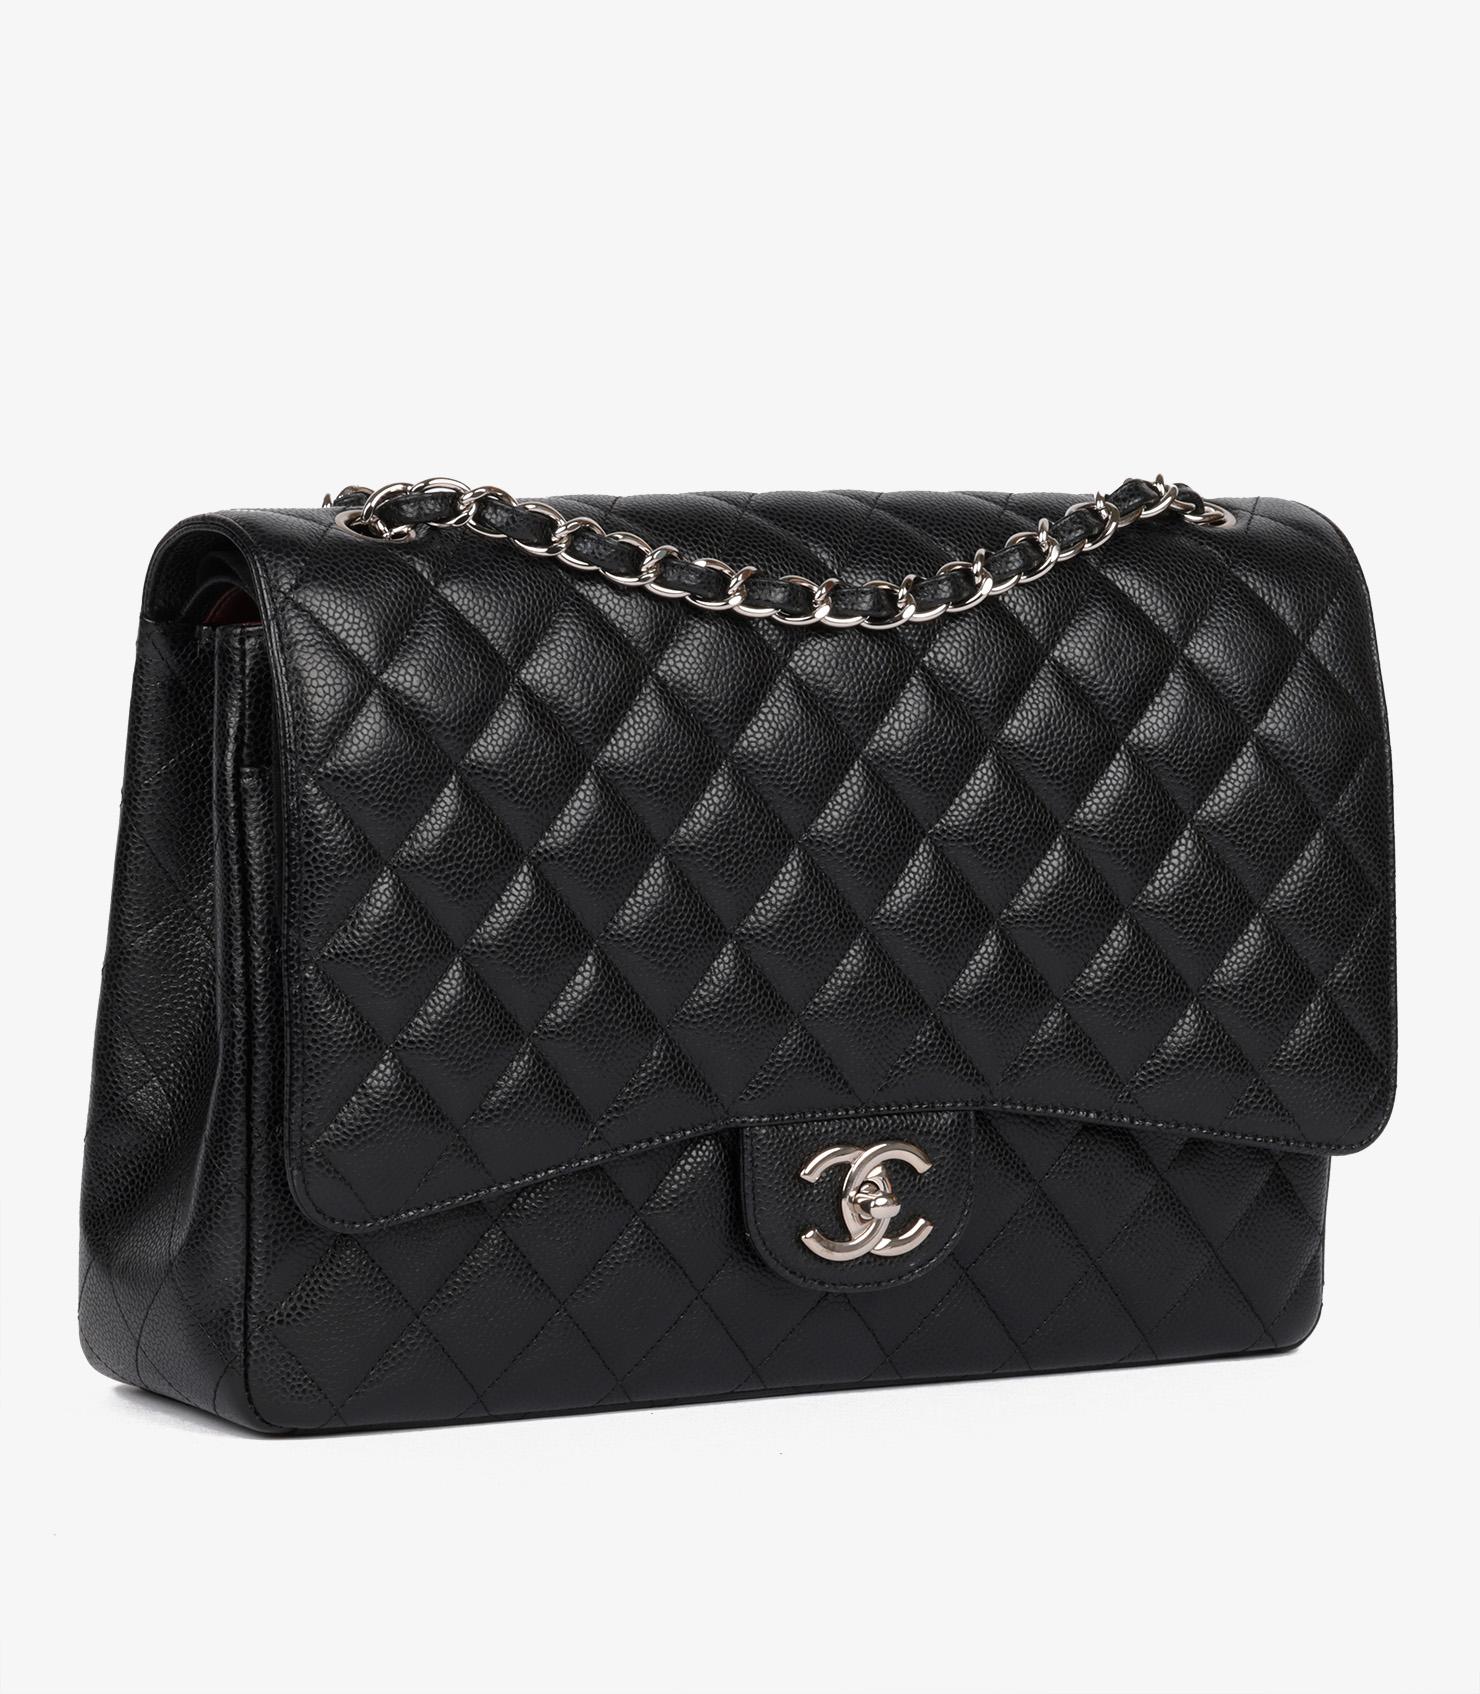 Chanel Black Quilted Caviar Leather Maxi Classic Double Flap Bag

Brand-Chanel
Model- Maxi Classic Double Flap Bag
Product Type- Shoulder
Serial Number- 19******
Age- Circa 2014
Accompanied By- Chanel Dust Bag, Box, Authenticity Card, Care Booklet,